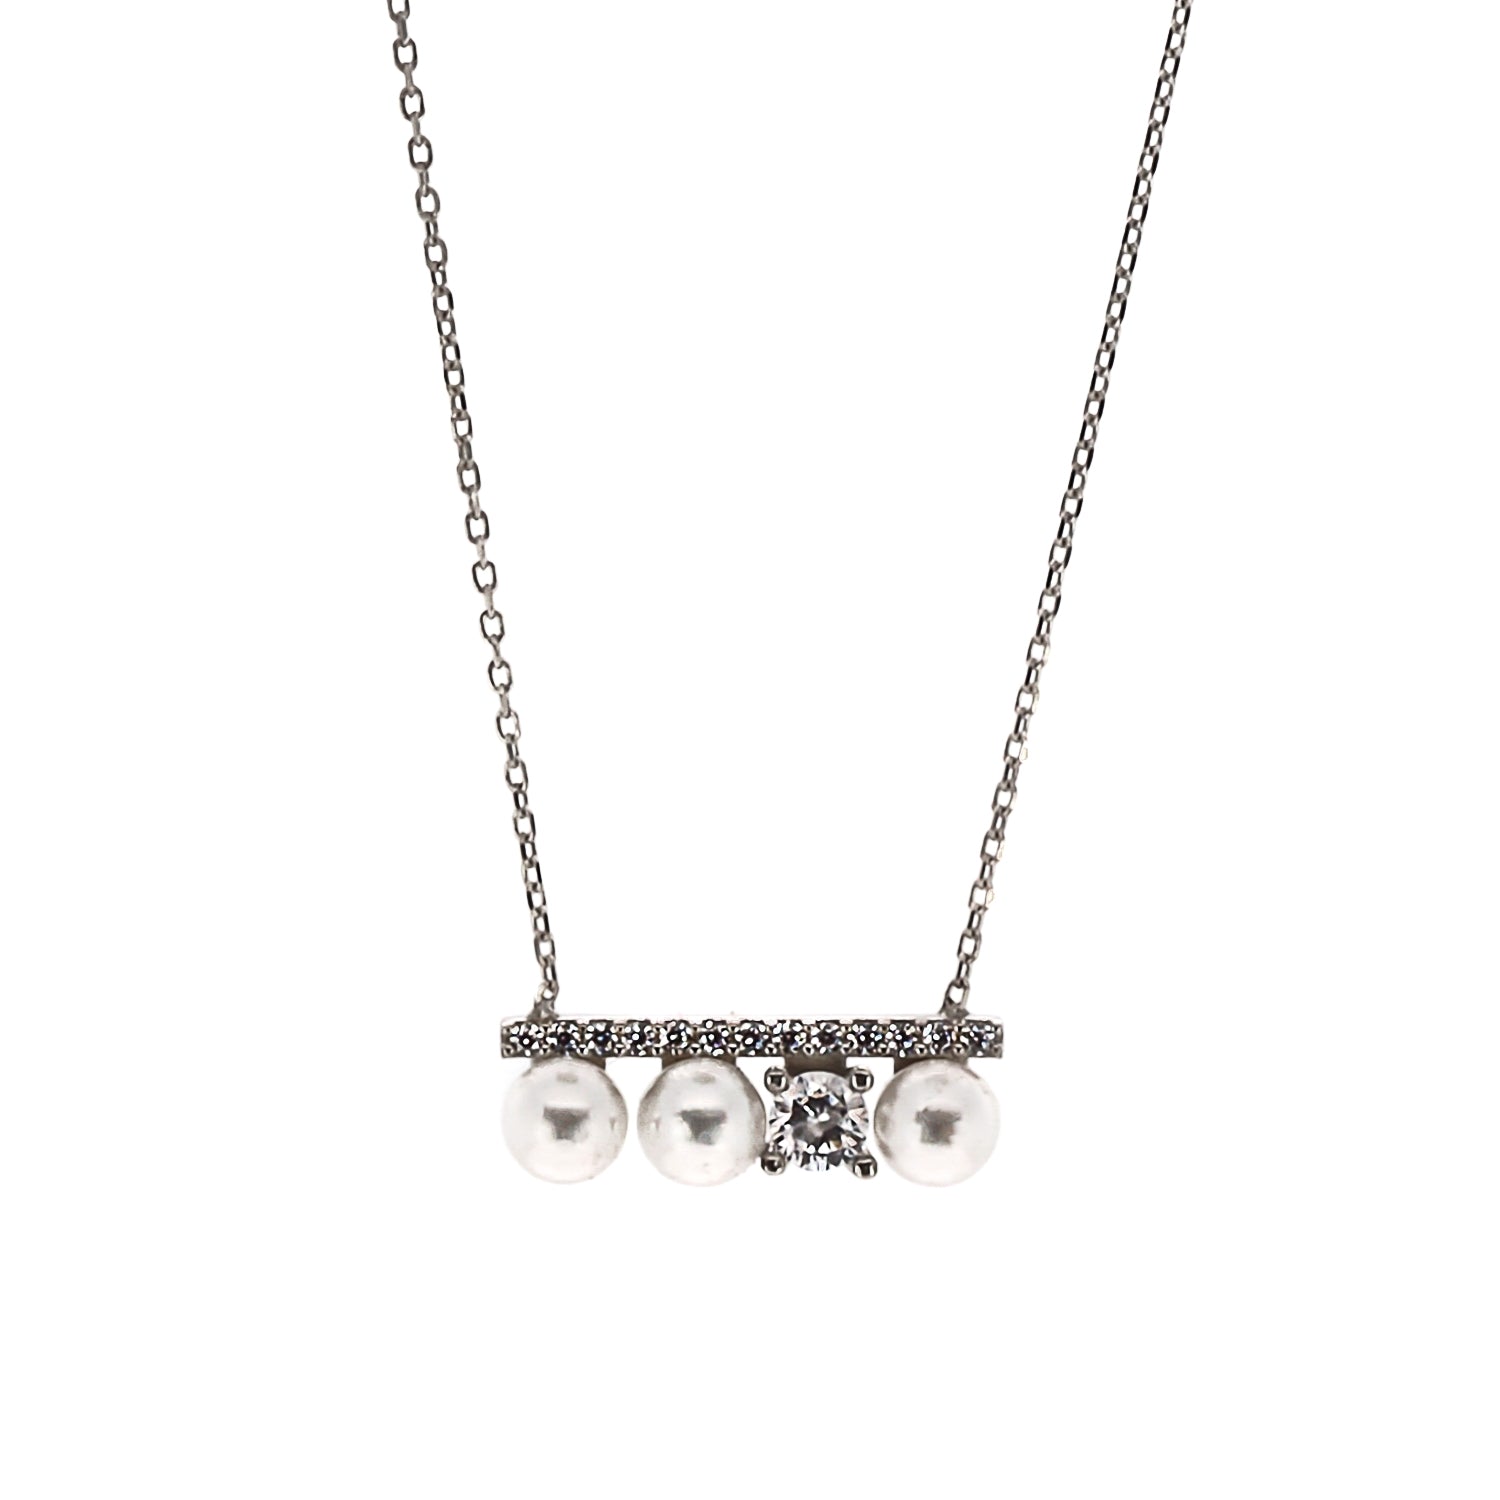 Pearl & Diamond Sterling Silver Necklace - Timeless beauty and contemporary chic.